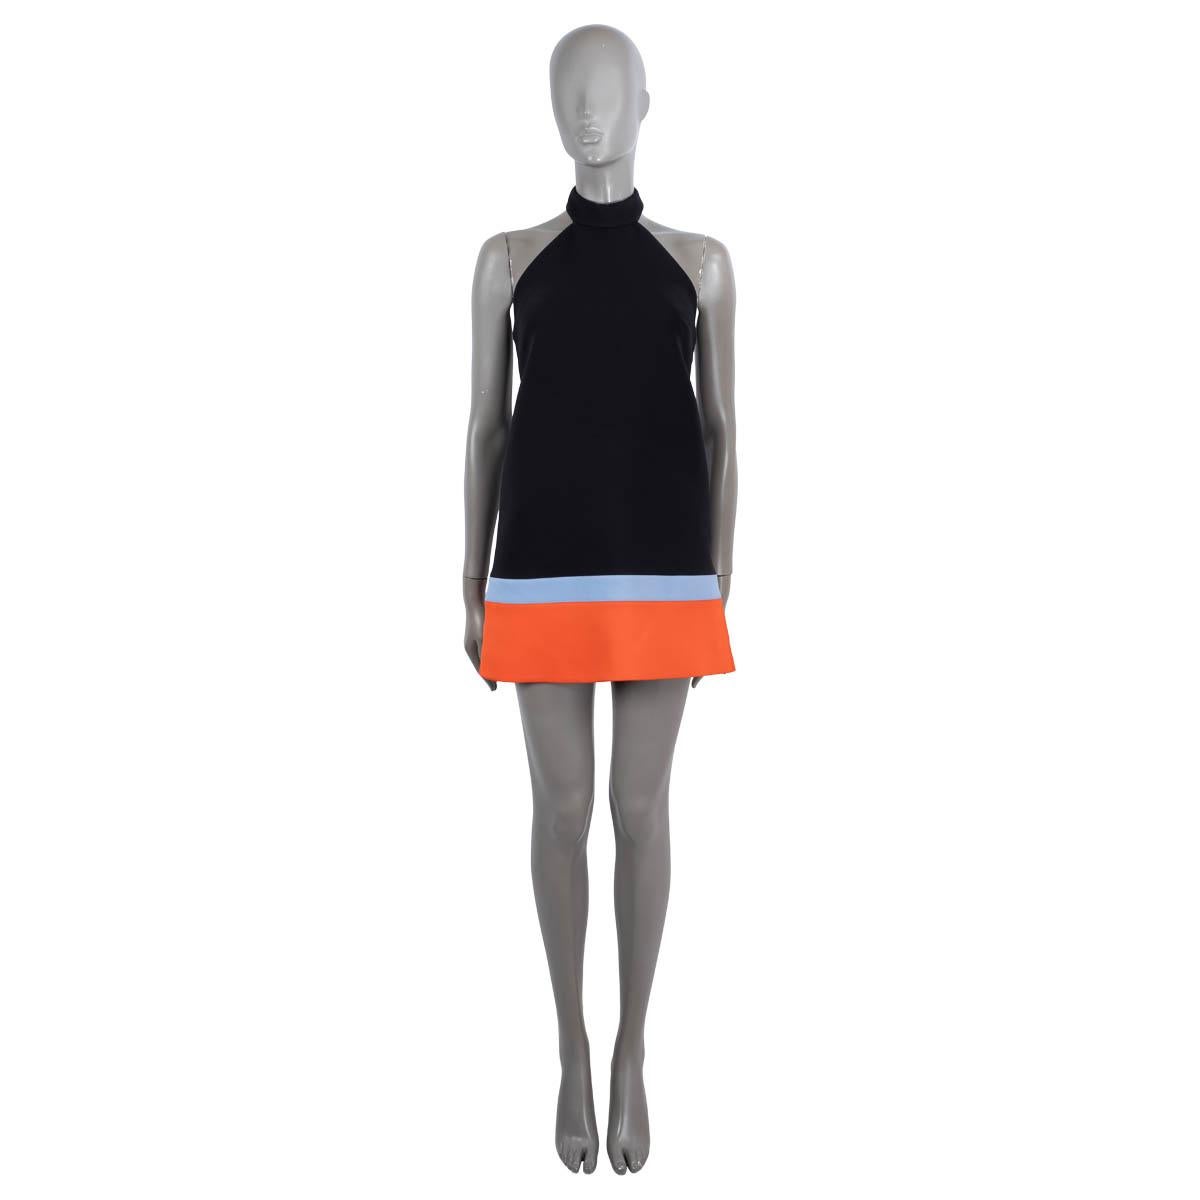 100% authentic Christian Dior colorblock halter mini dress in black, blue and orange polyamide (67%) and viscose (33%). Features a split hem. Closes with a concealed zipper in the back. Lined in silk (100%). Has been worn and is in excellent